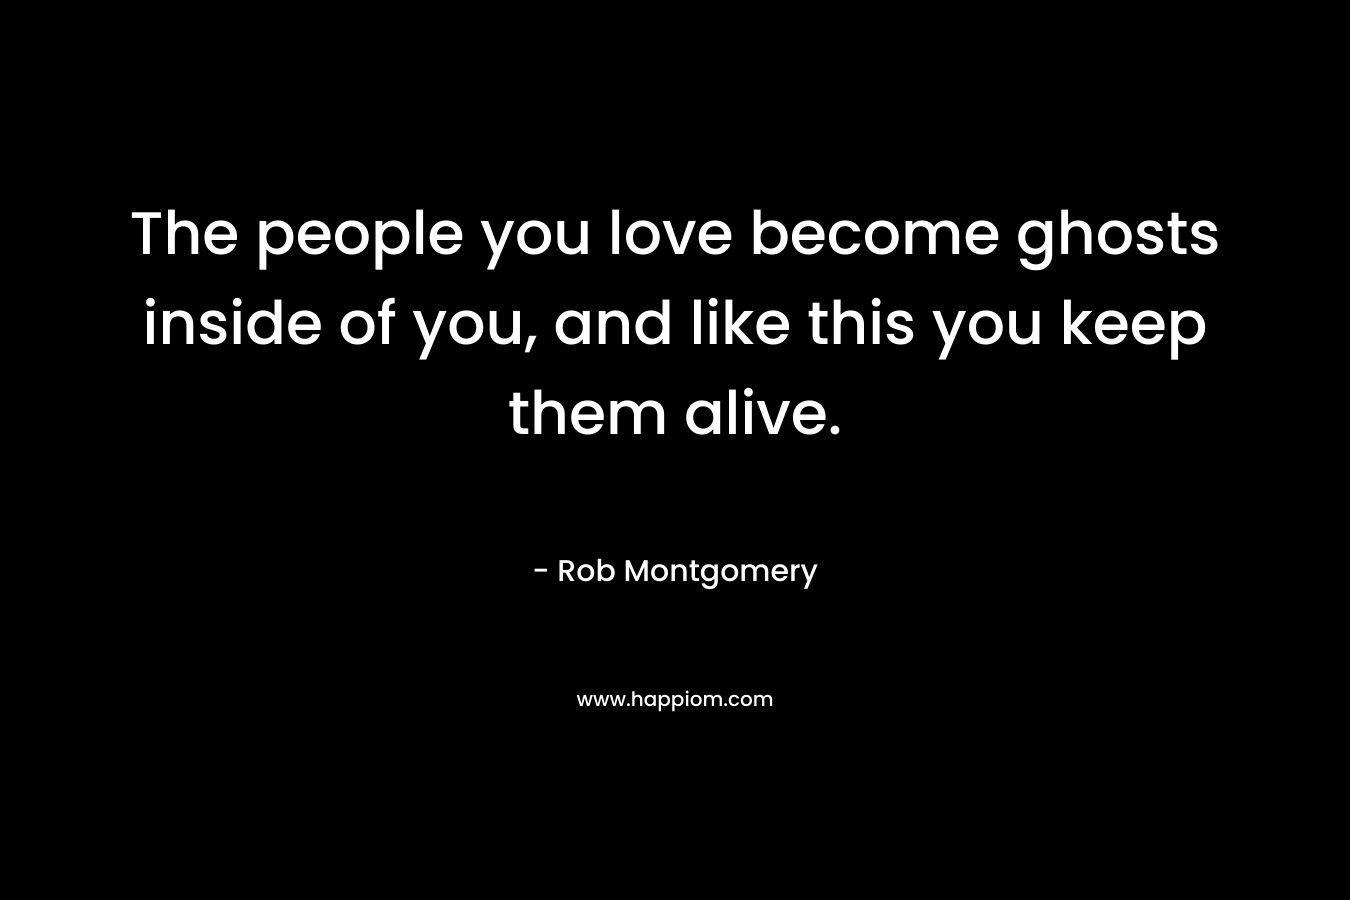 The people you love become ghosts inside of you, and like this you keep them alive. – Rob Montgomery